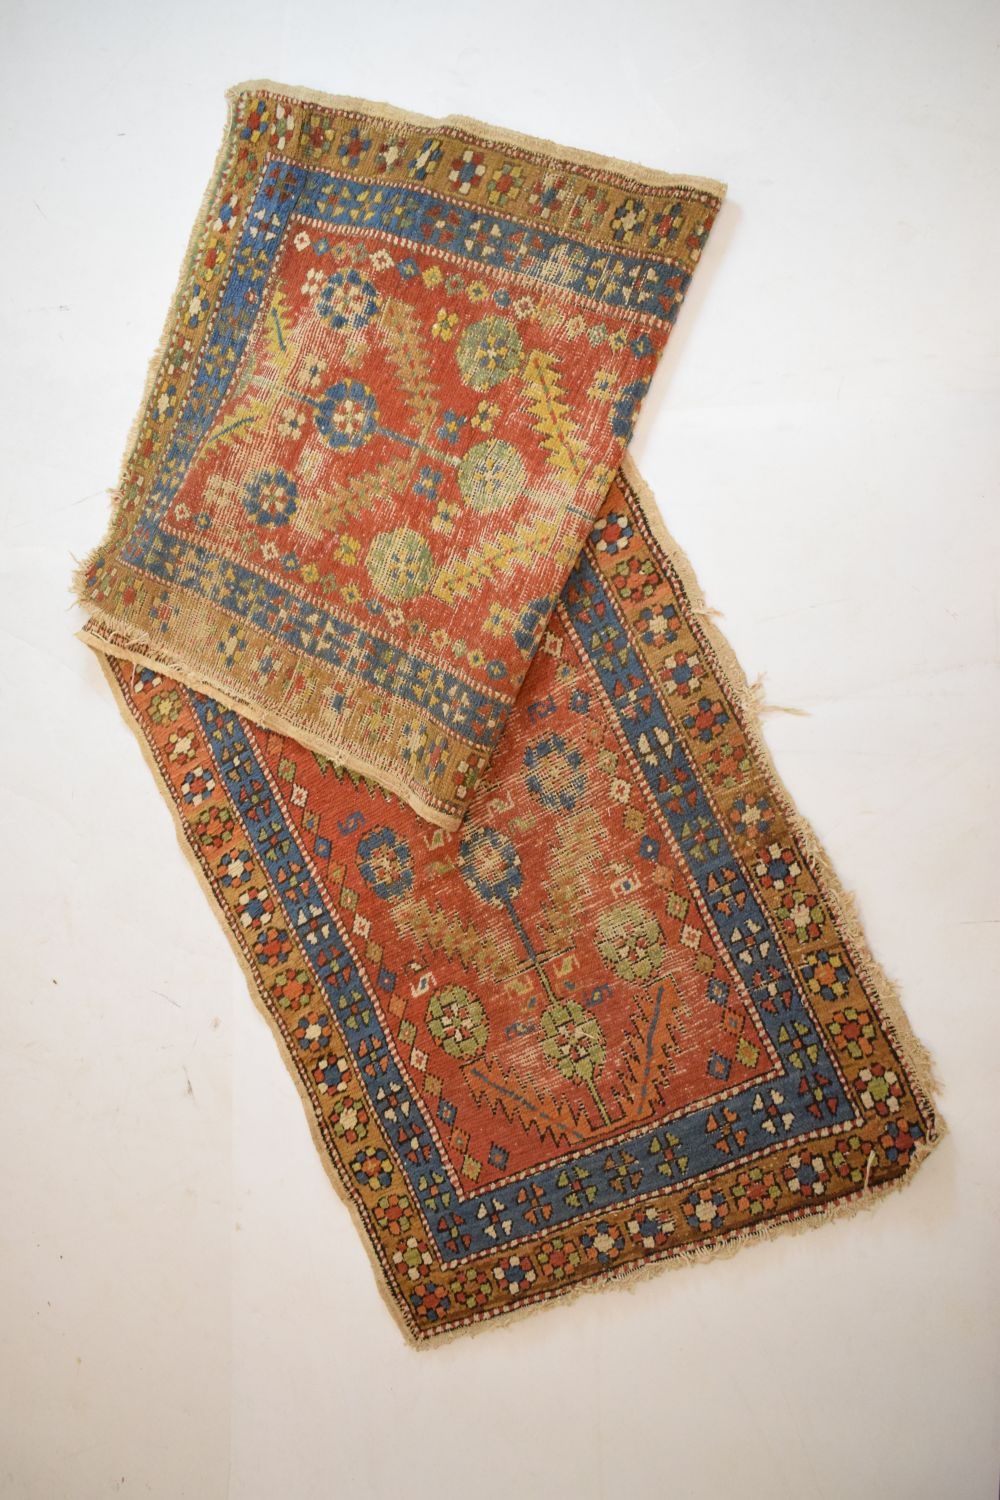 Early to mid 20th Century Caucasian wool runner, the brick-red field with flowering plant motif - Image 2 of 5